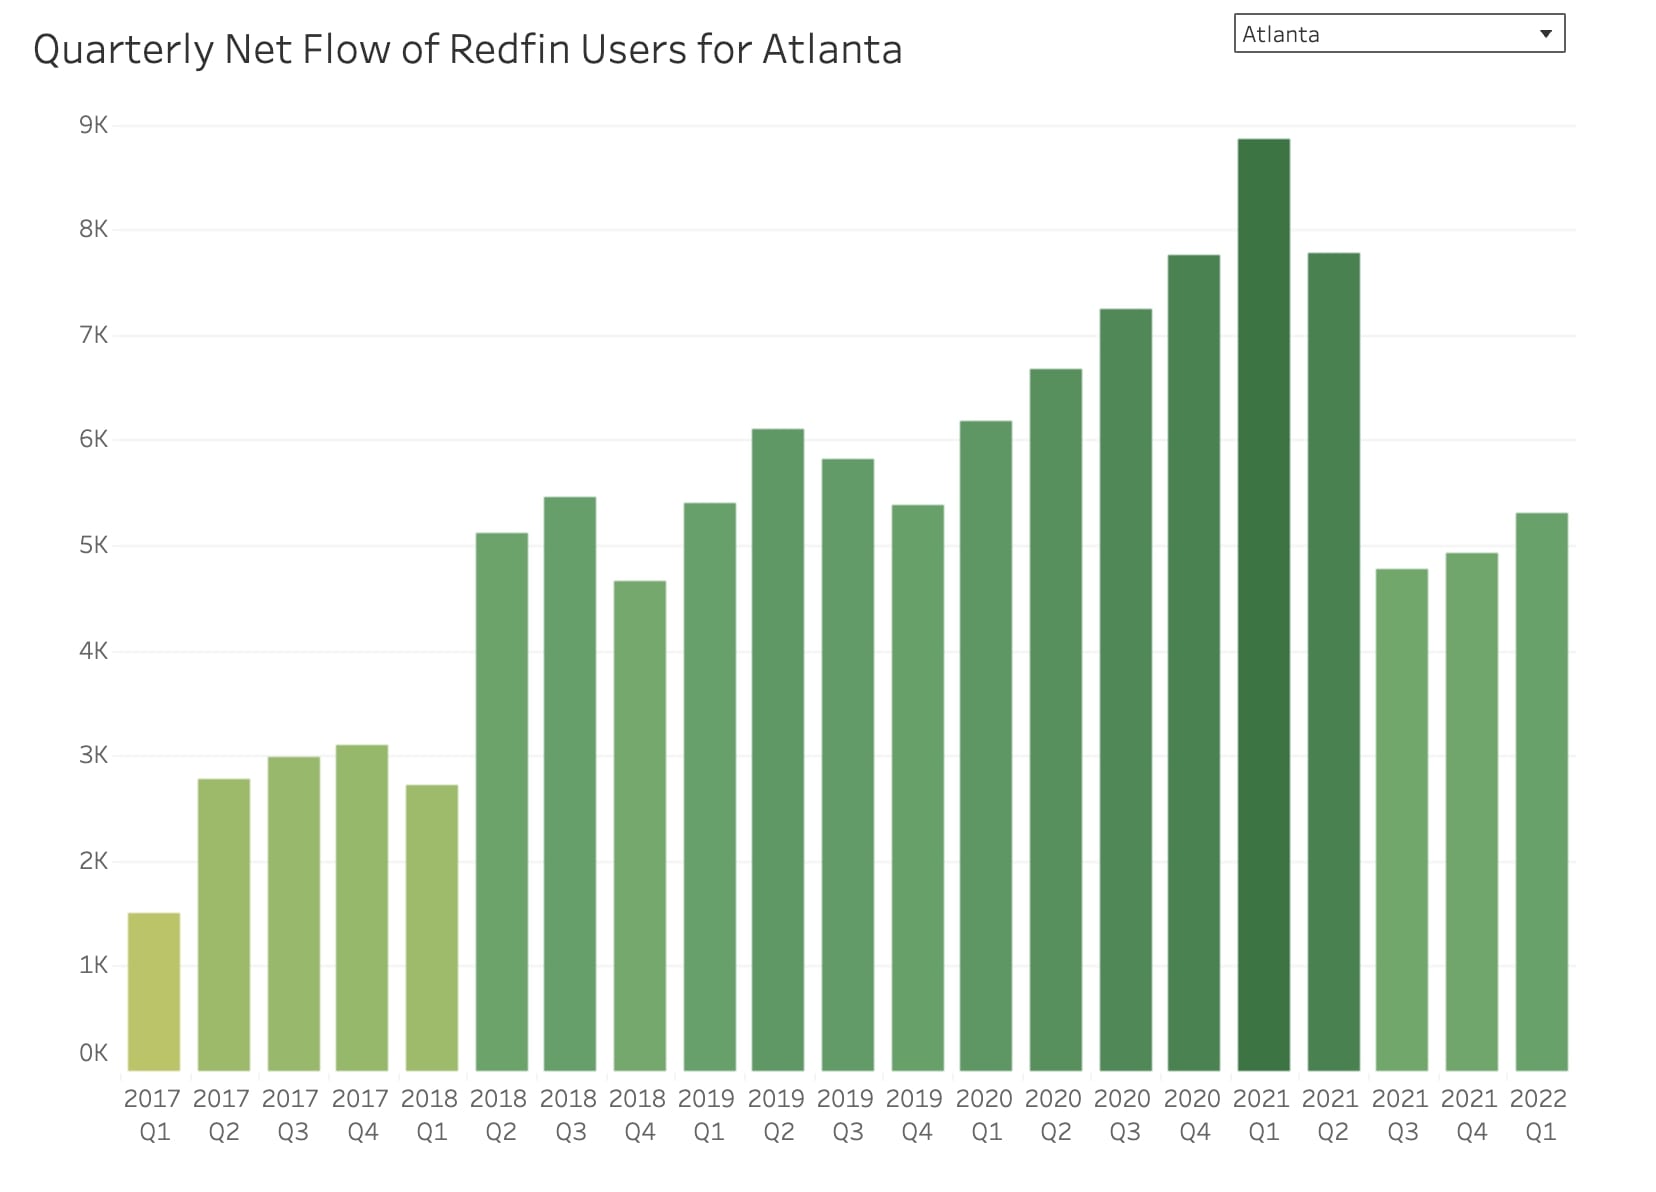 Quarterly Net Flow of Redfin Users for Atlanta (2017-2022) - Redfin